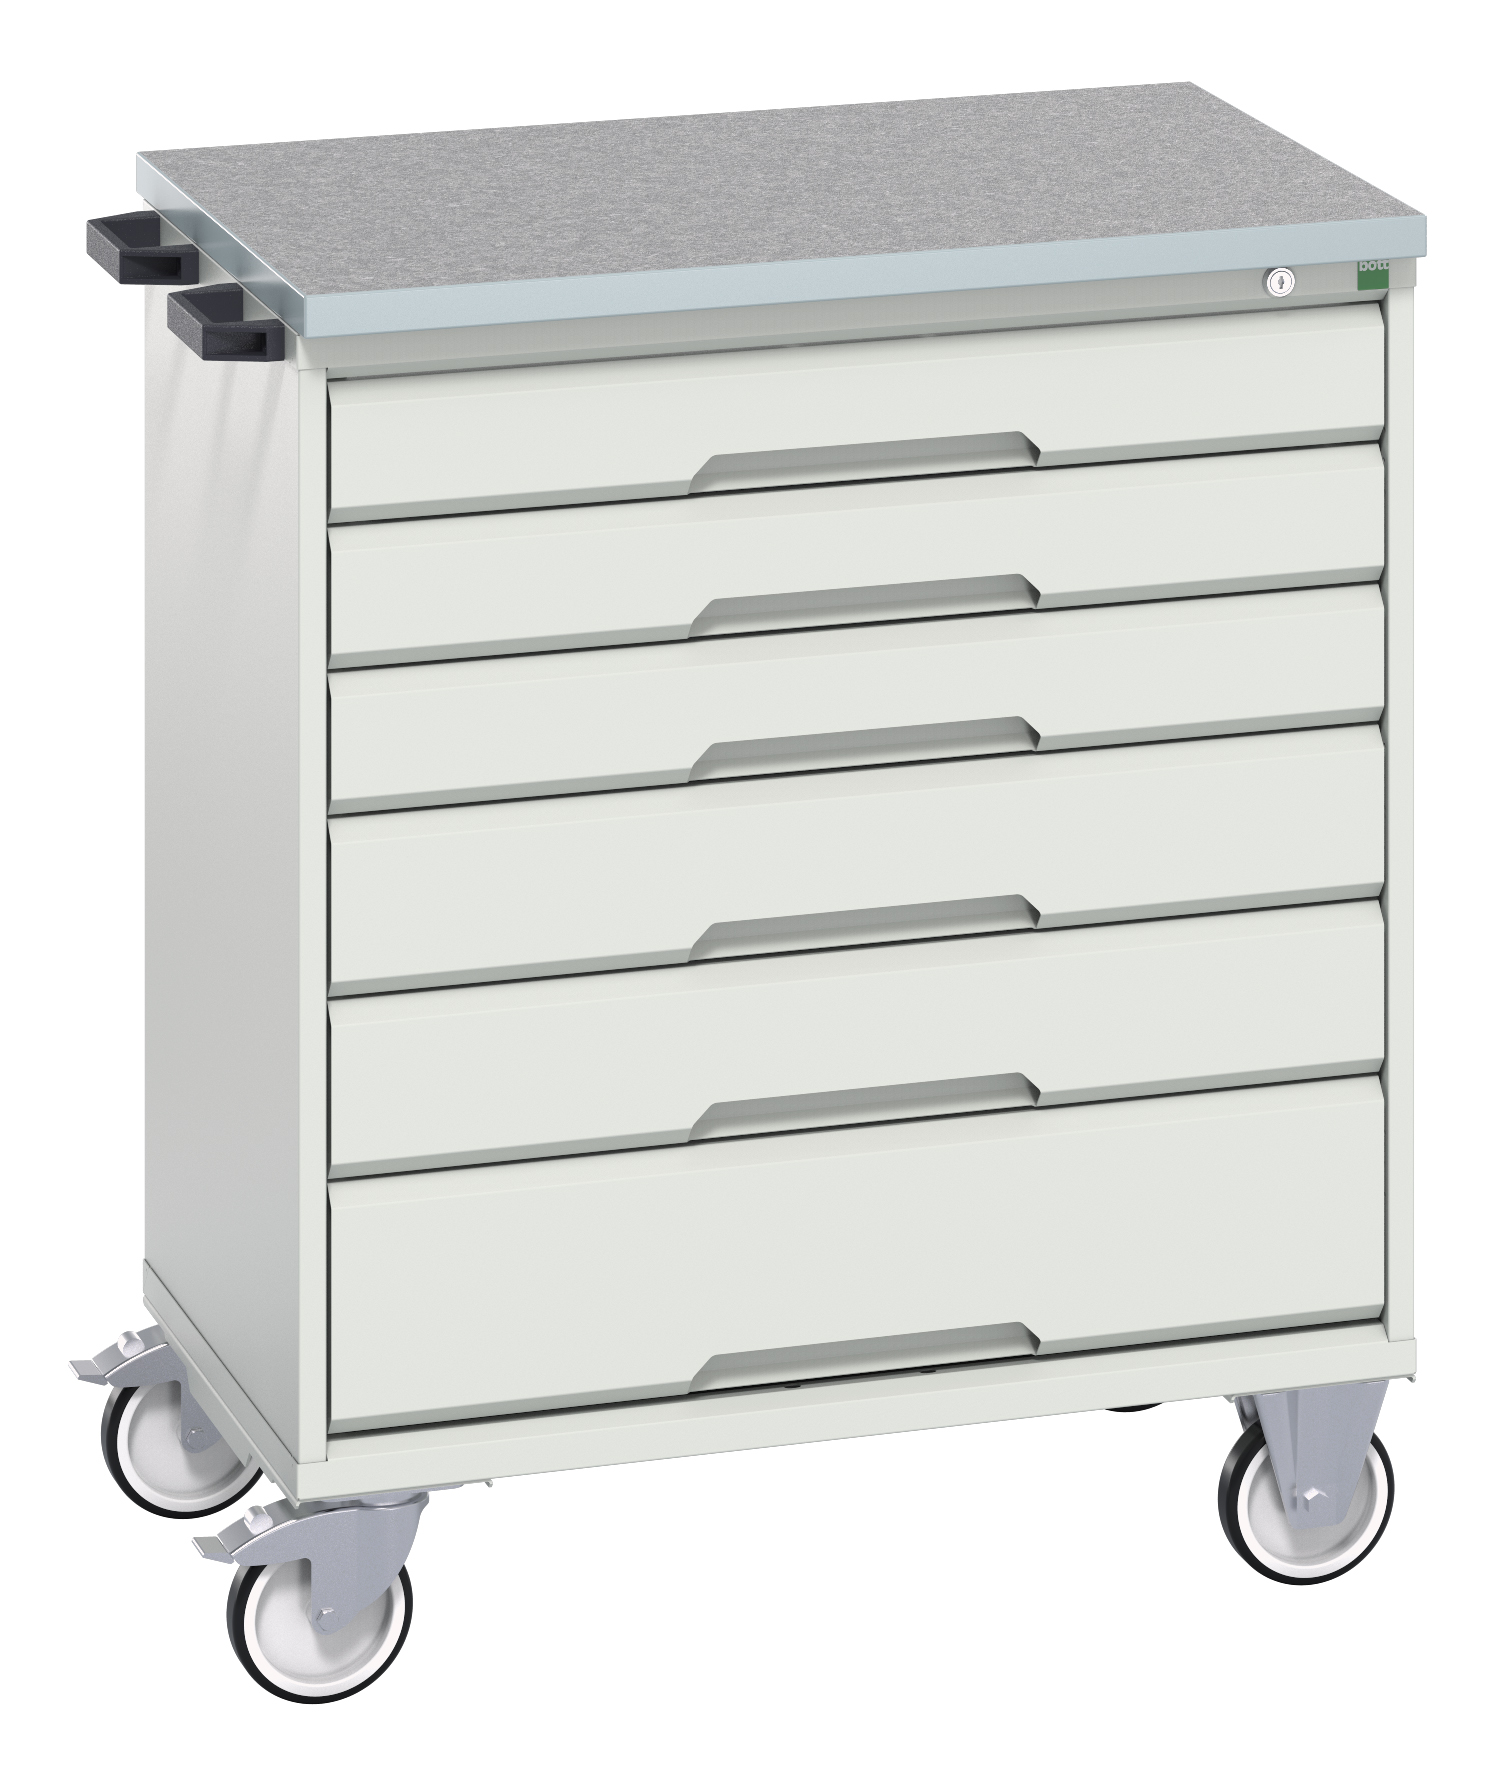 Bott Verso Mobile Drawer Cabinet With 6 Drawers & Lino Top - 16927003.16